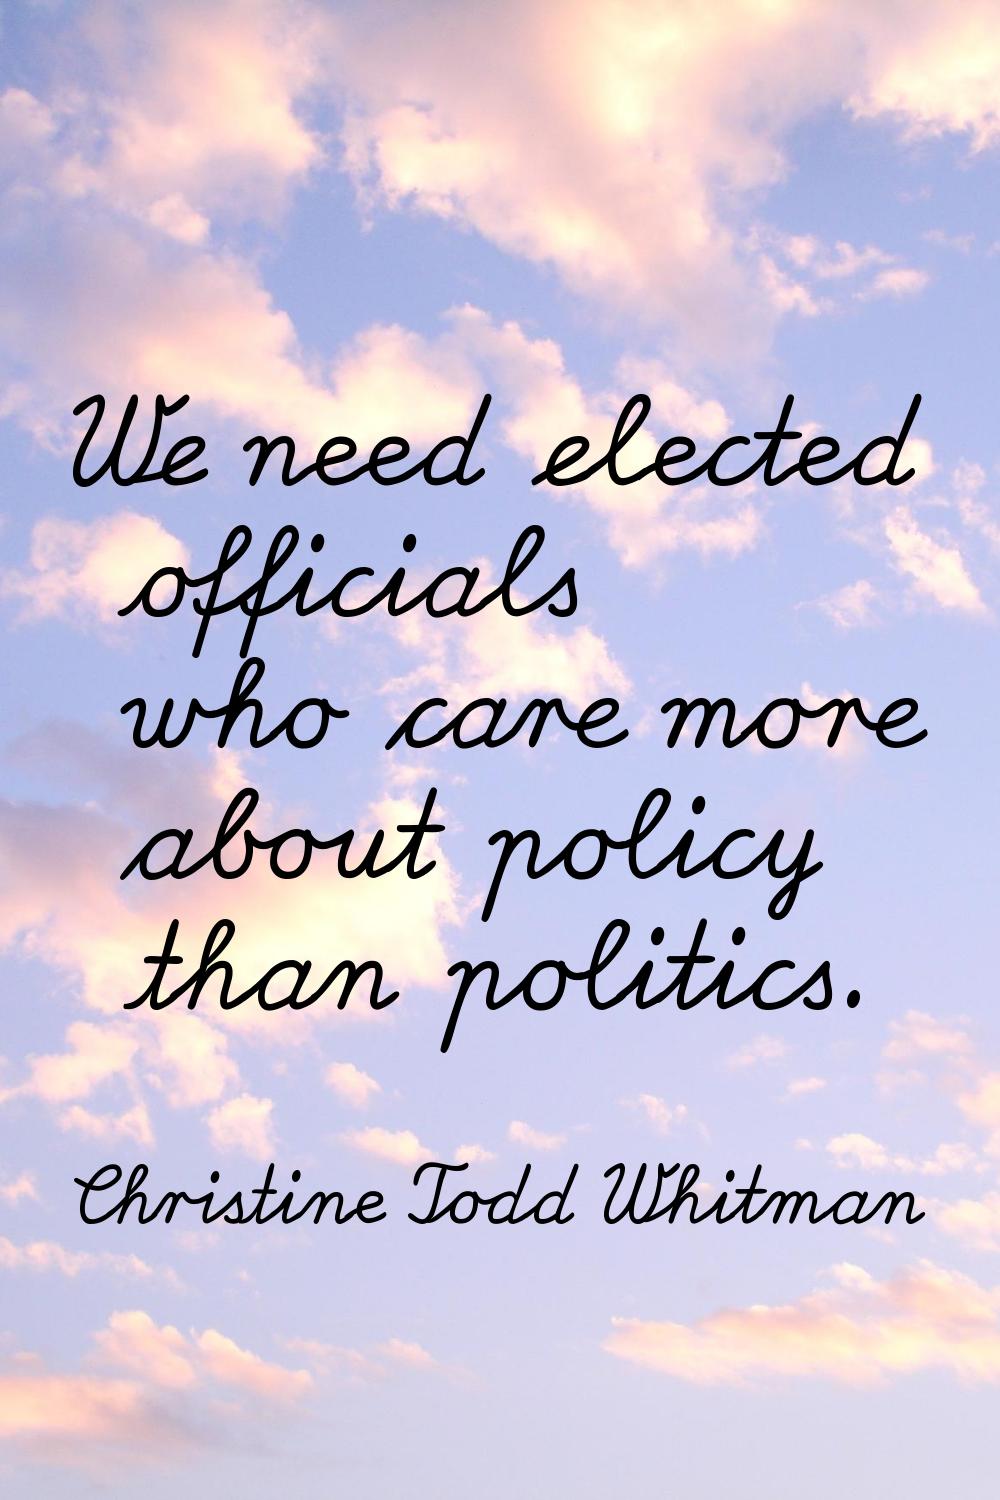 We need elected officials who care more about policy than politics.